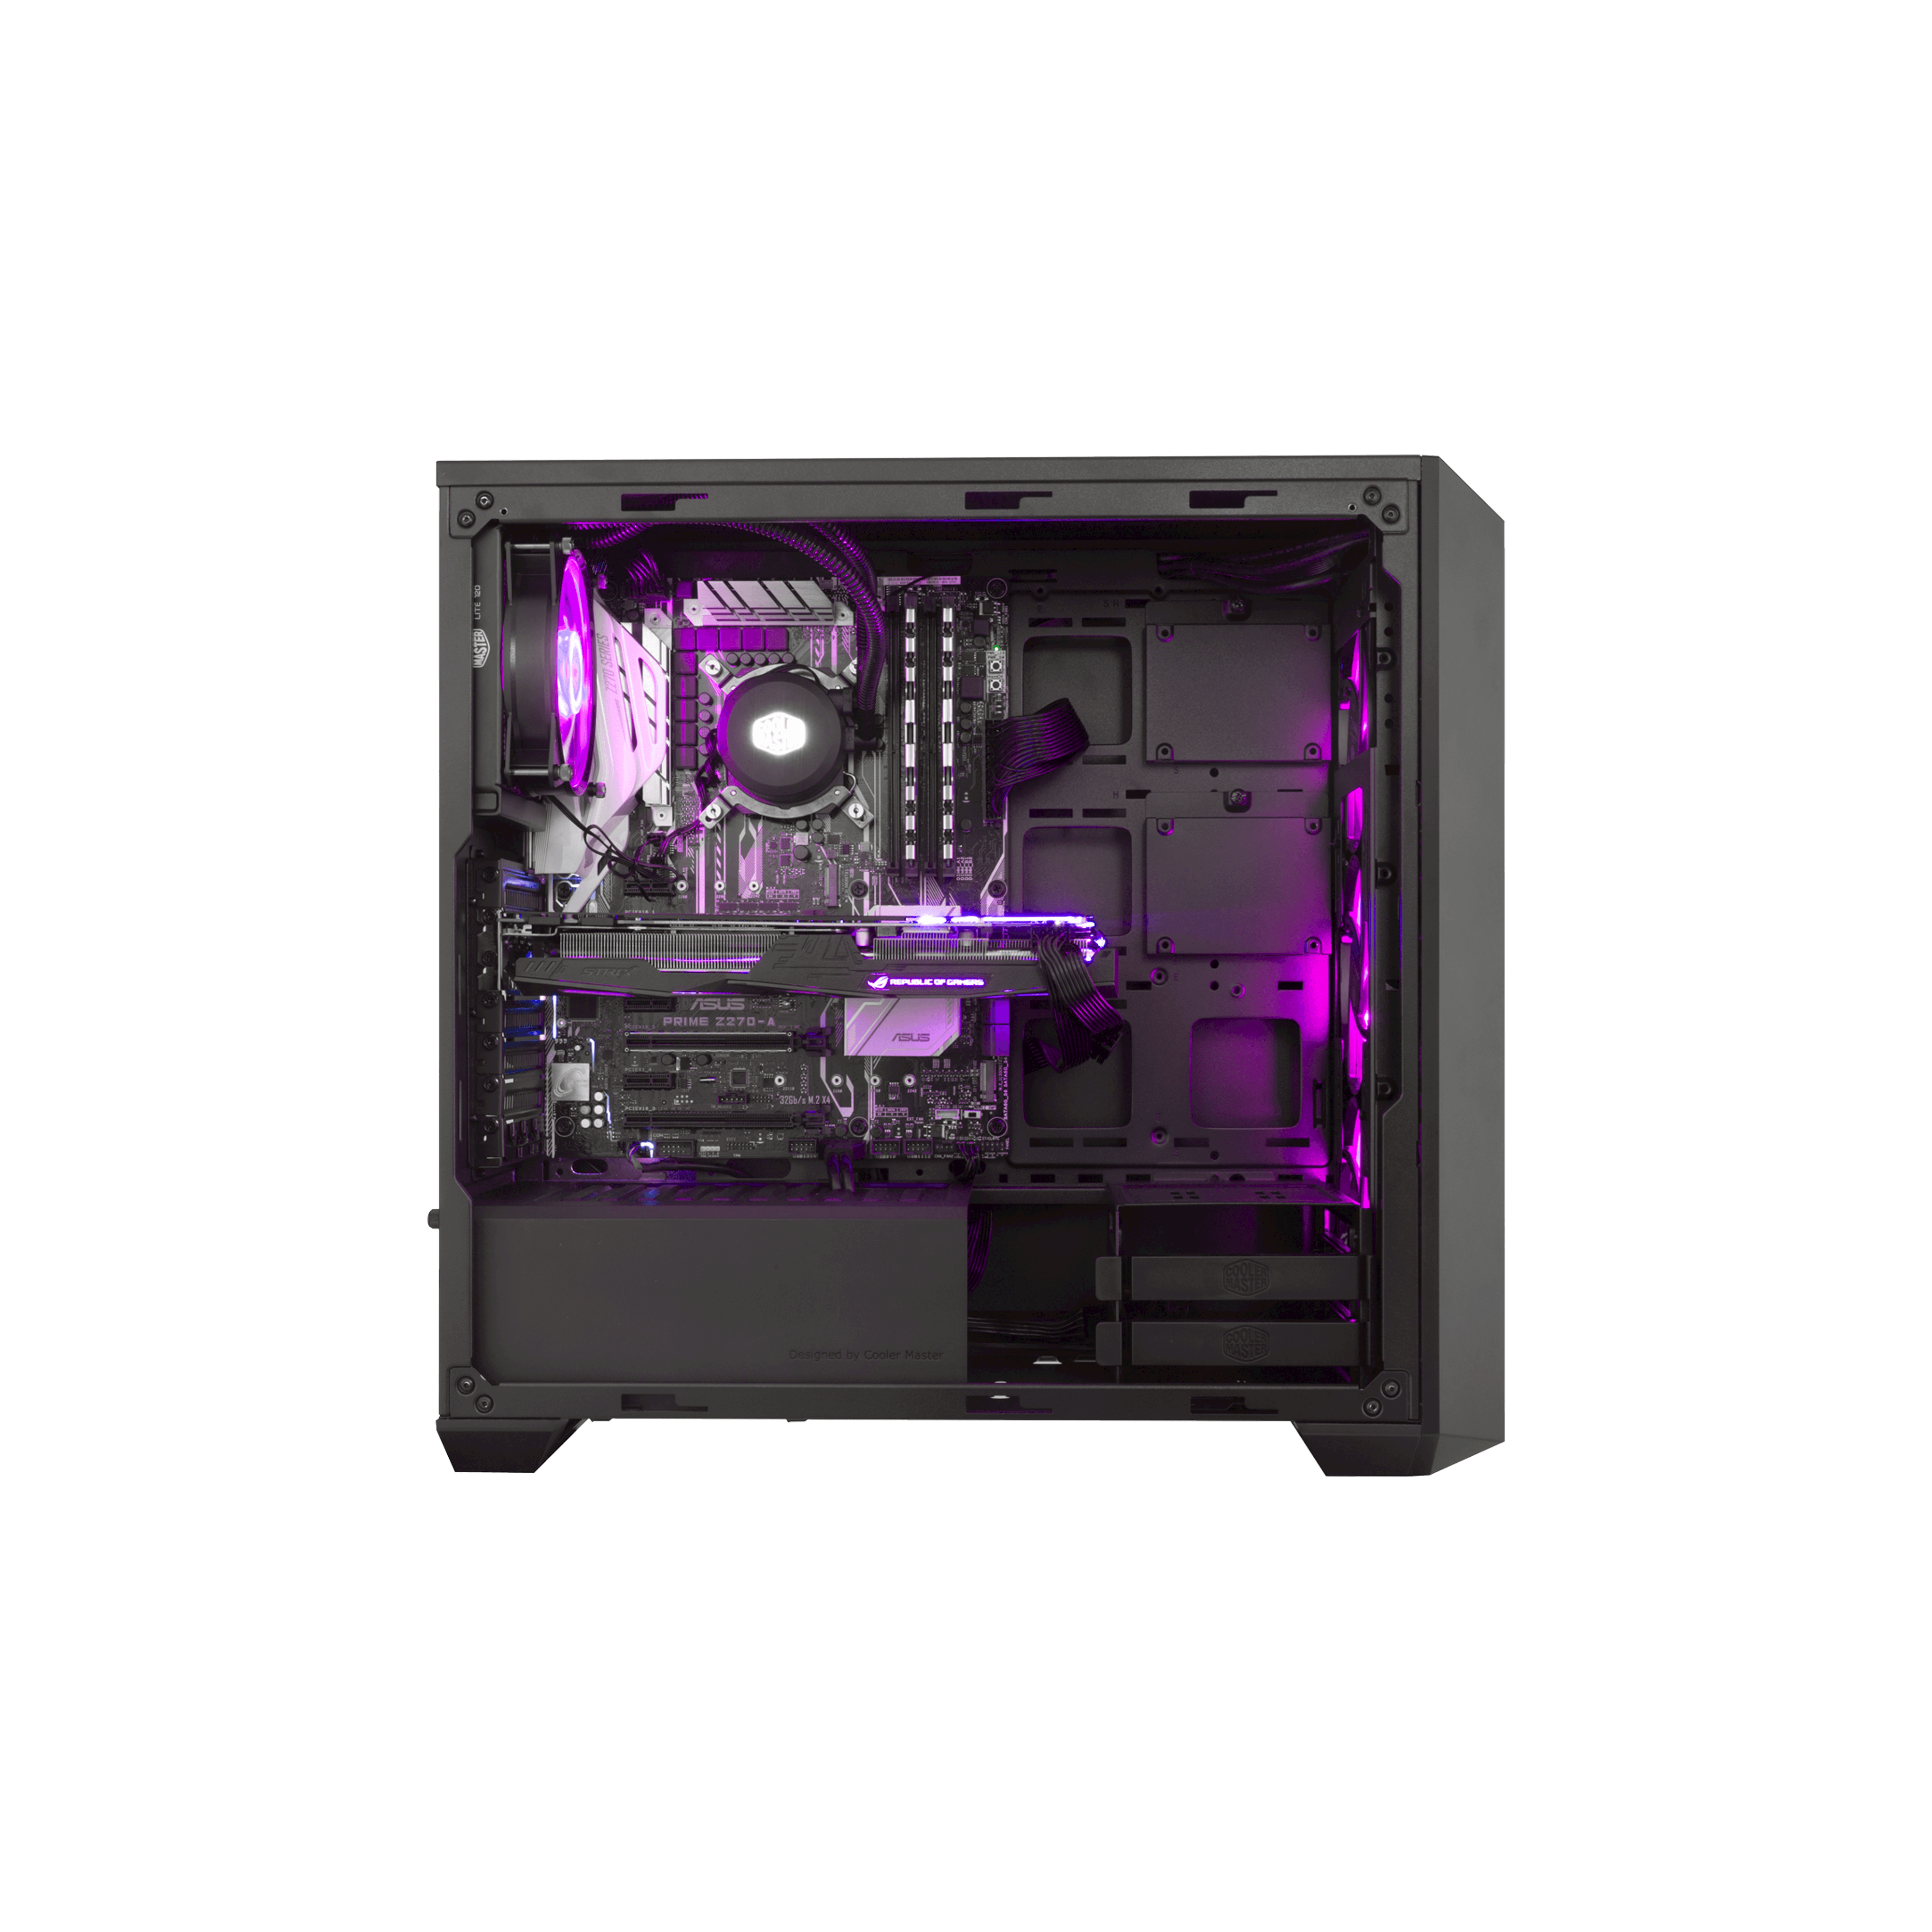 Cooler Master MasterBox Pro 5 ARGB ATX Mid-Tower with Adaptable Layout  E-ATX up to 10.5, DarkMirror Front Panel, Tempered Glass, Three 120mm ARGB